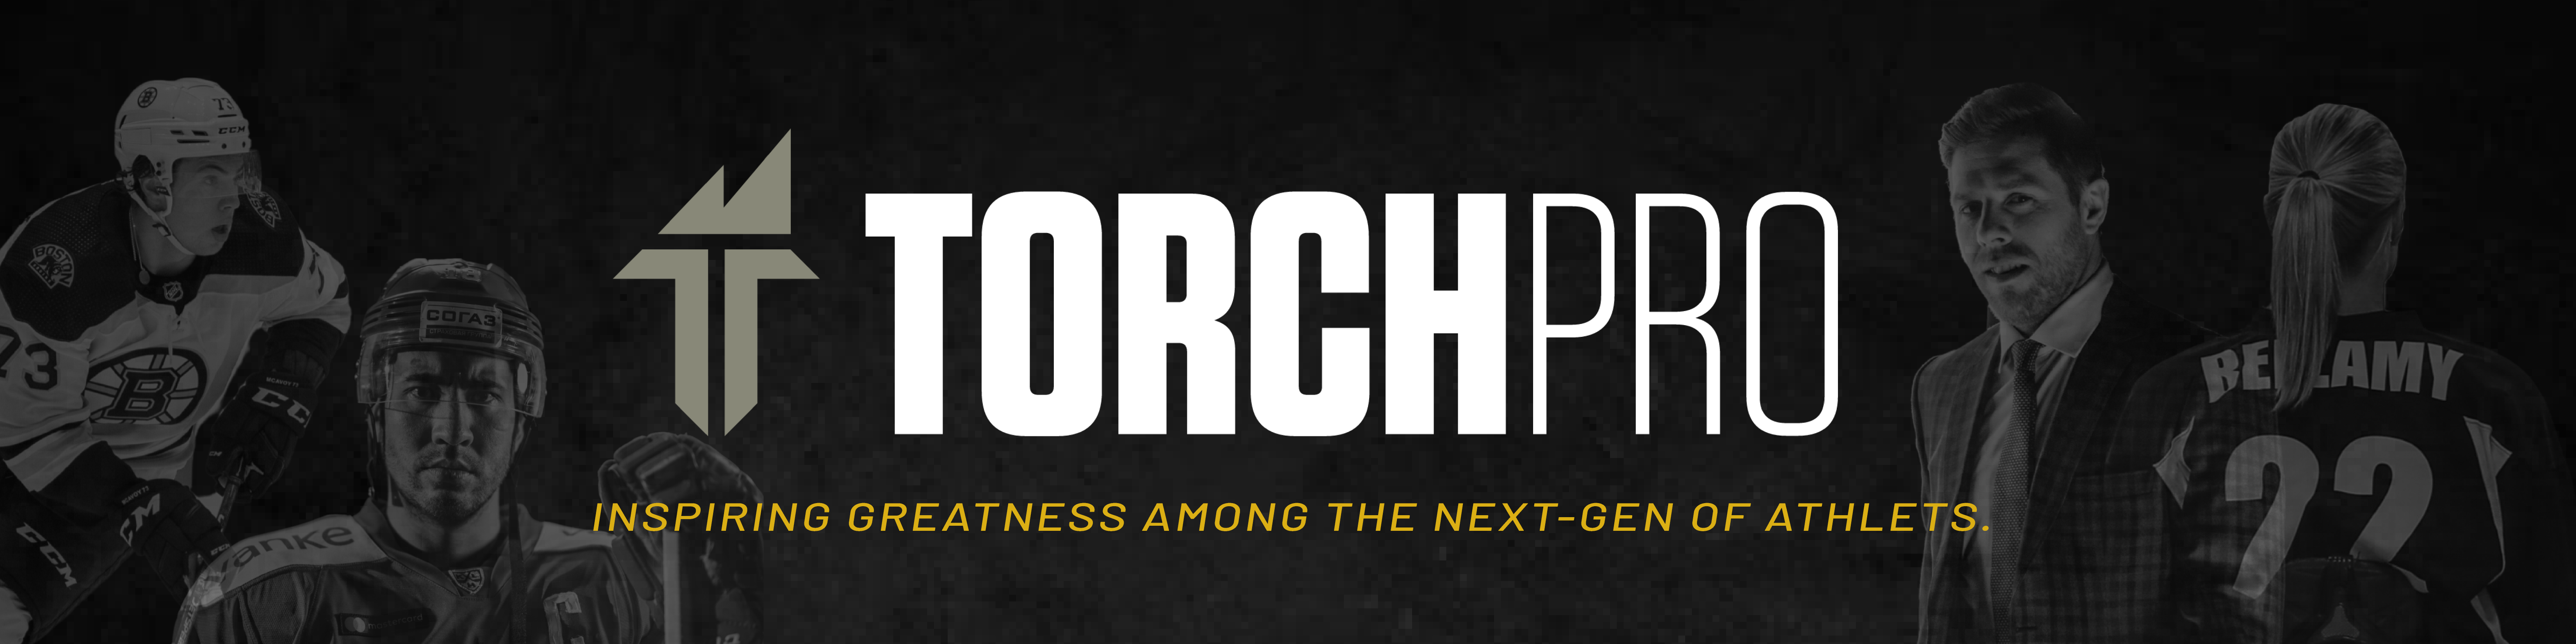 TorchCo, Tuesday, March 16, 2021, Press release picture